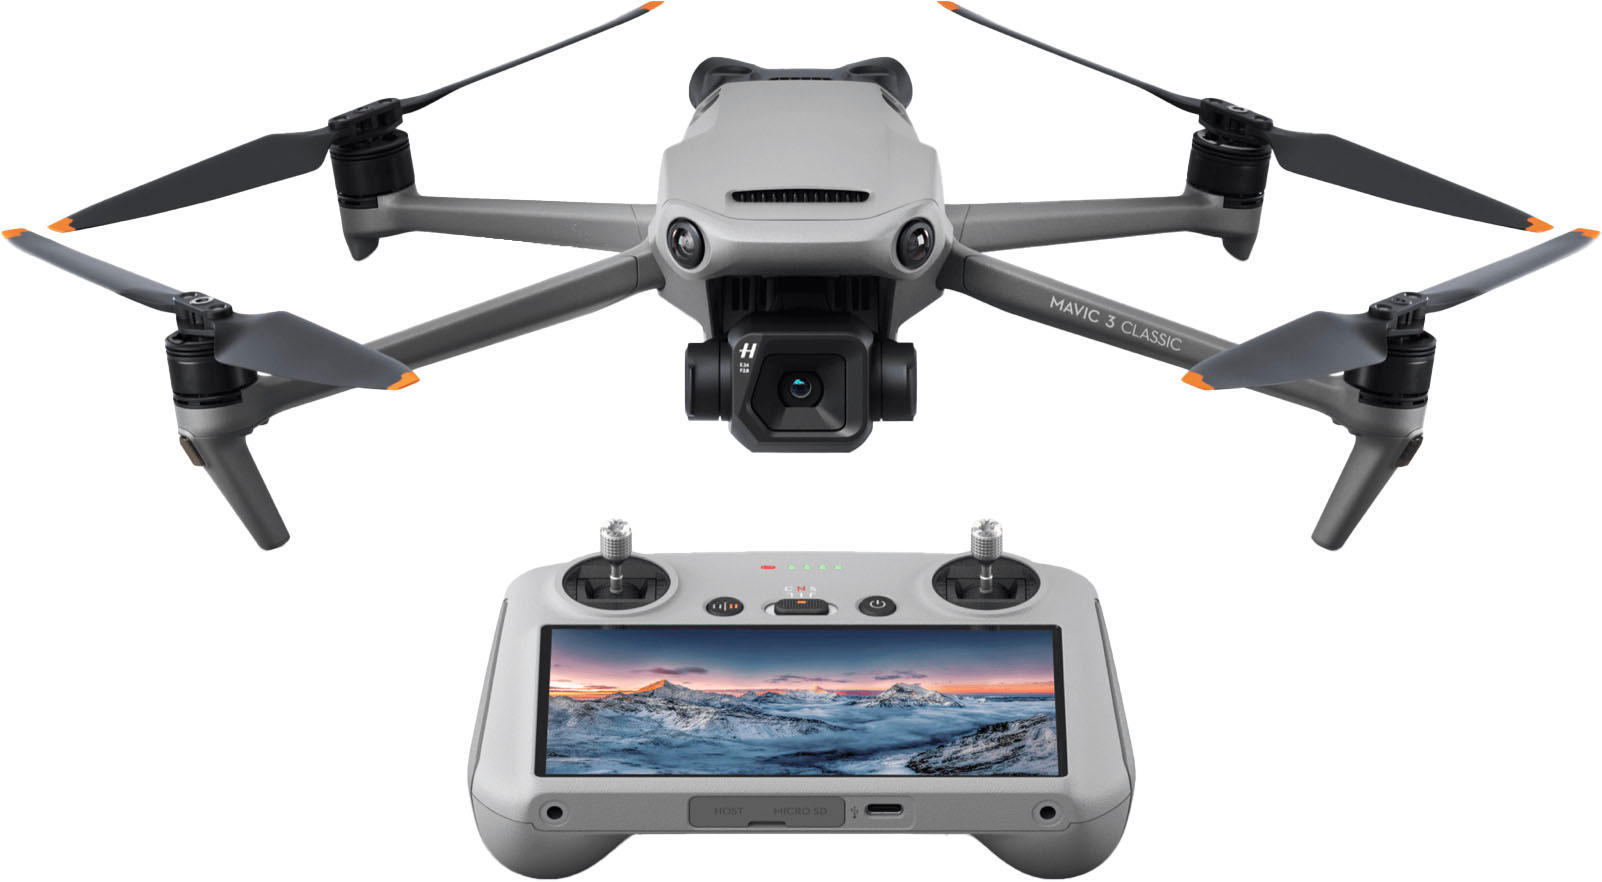 DJI - Mavic 3 Classic and Remote Controller with Built-in Screen - Gray